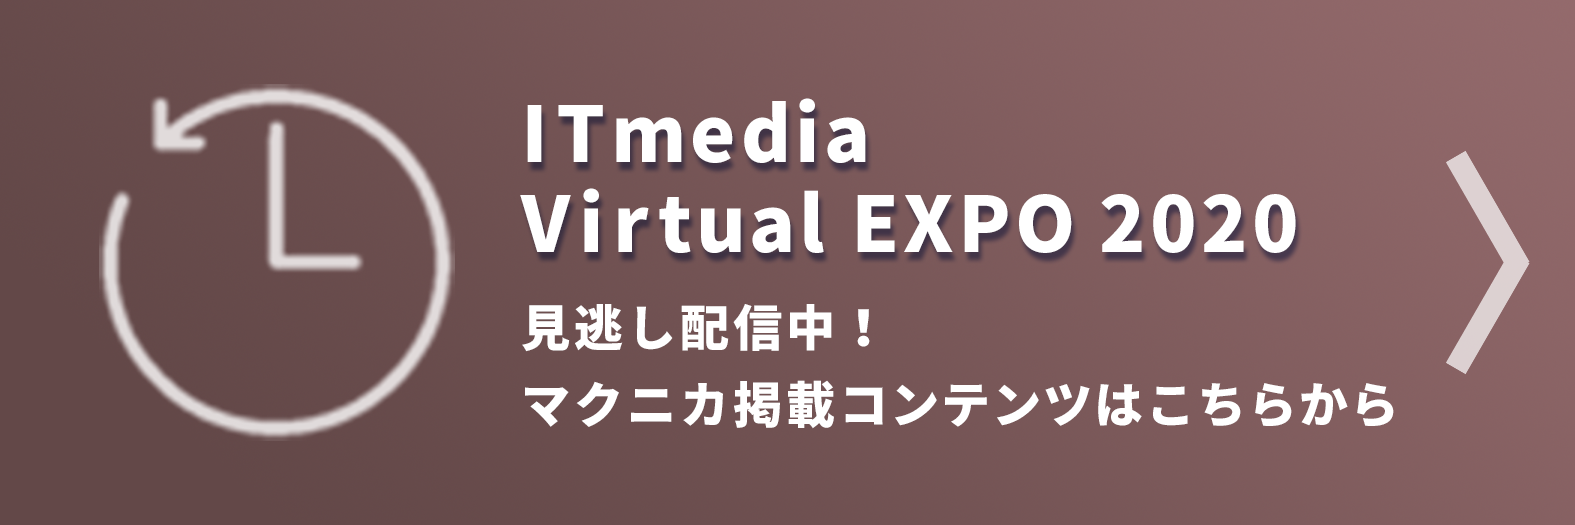 ITmedia Virtual EXPO 2020 Macnica Contents Missed Delivery